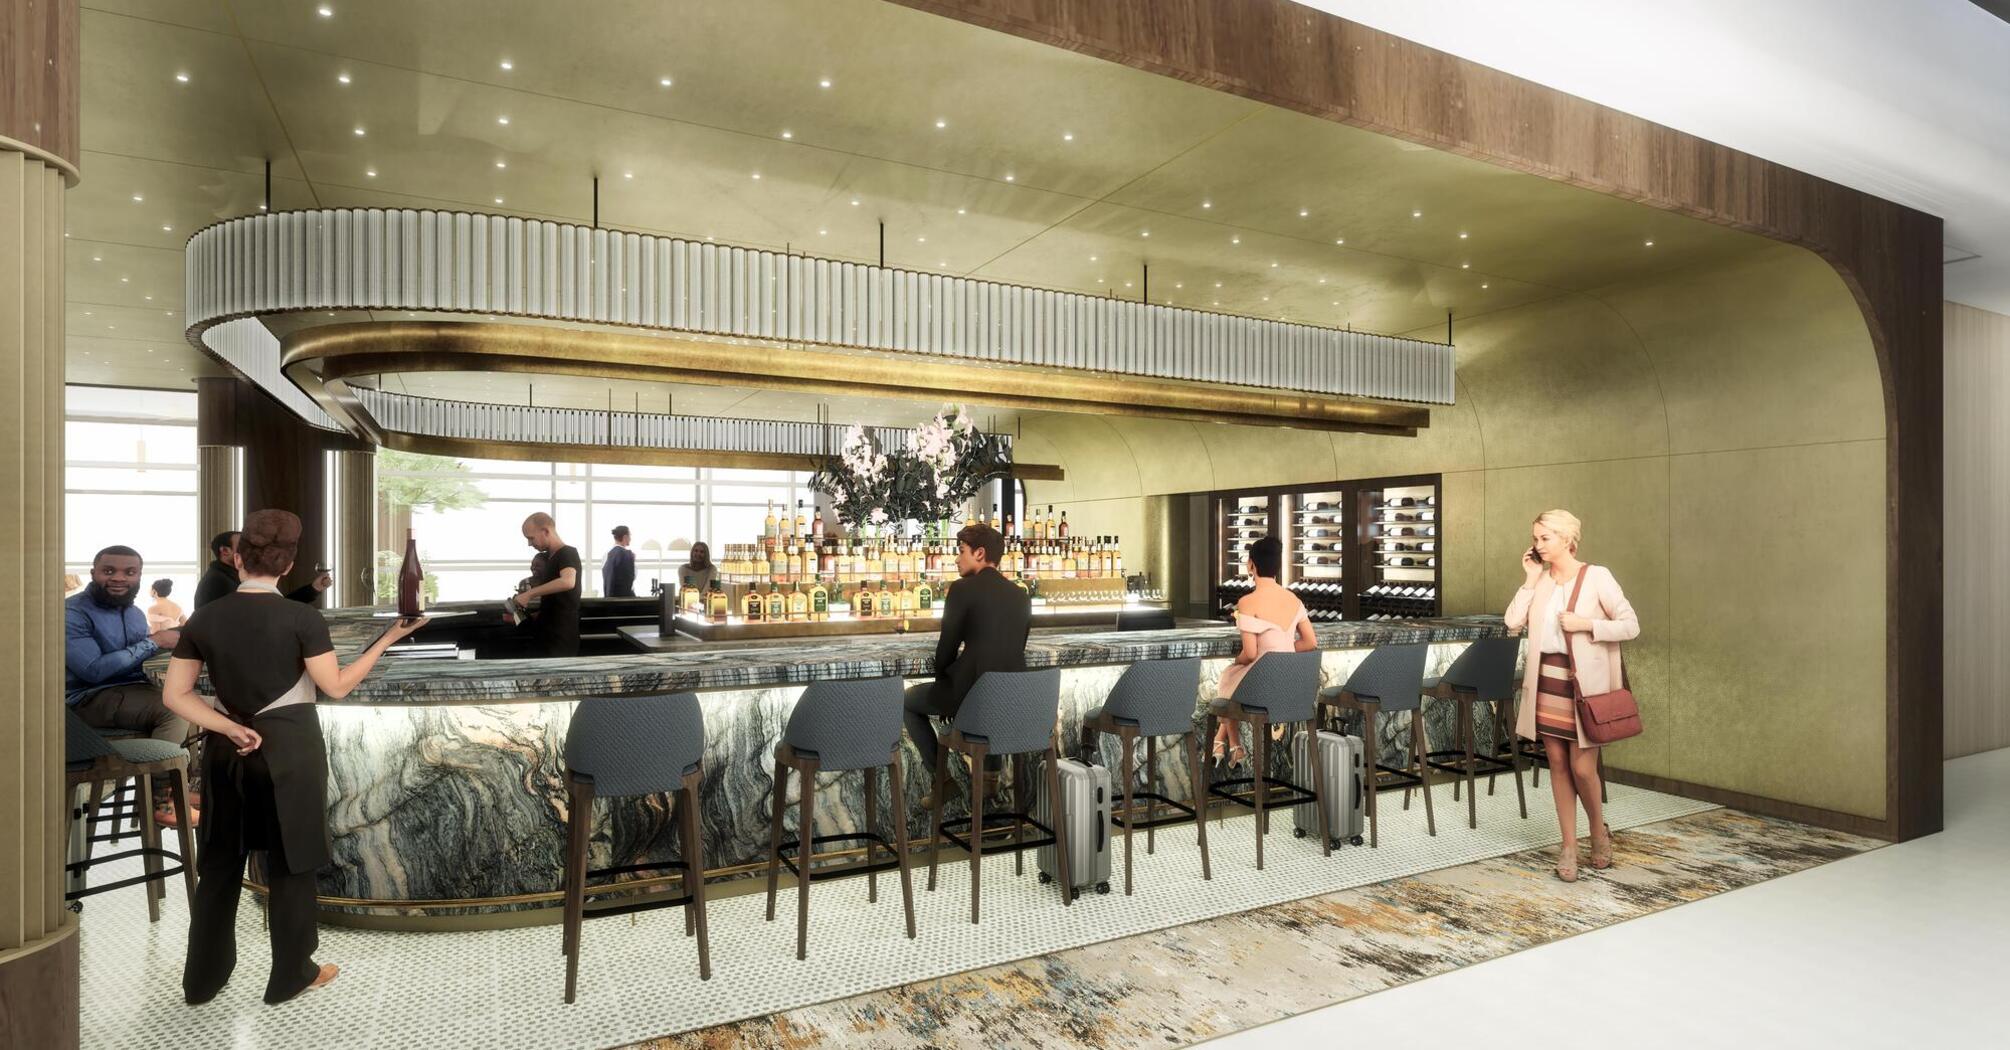 Delta Air Lines announced the creation of new premium lounges